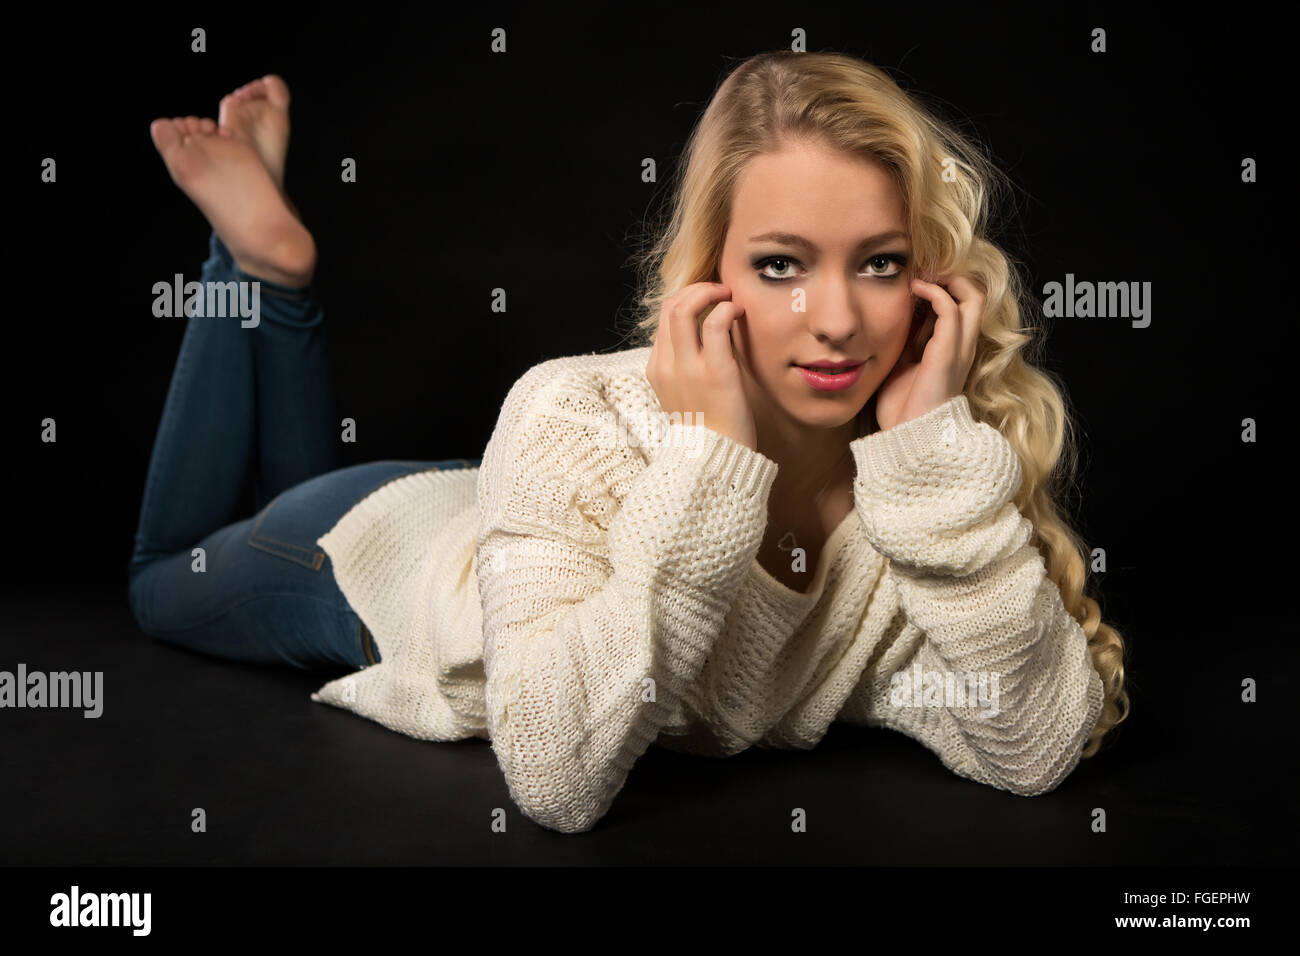 Young blond woman in white sweater Stock Photo